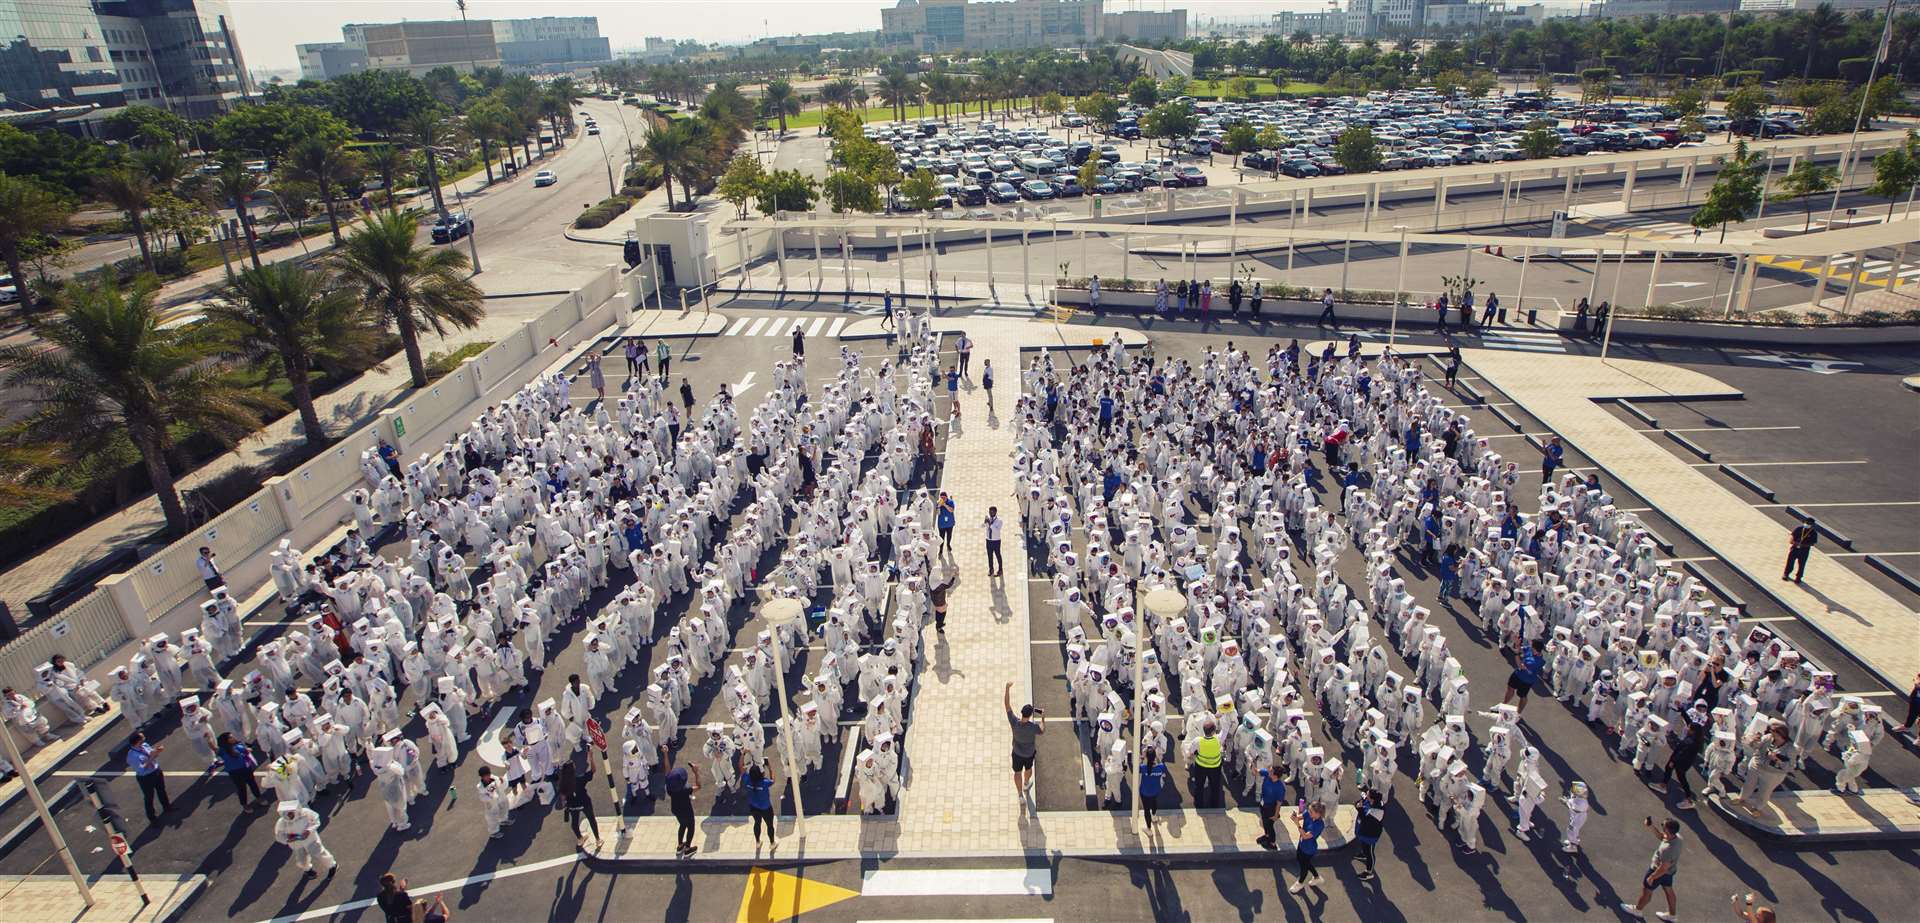 The largest gathering of people dressed as astronauts was in Abu Dhabi (Guinness World Records/PA)